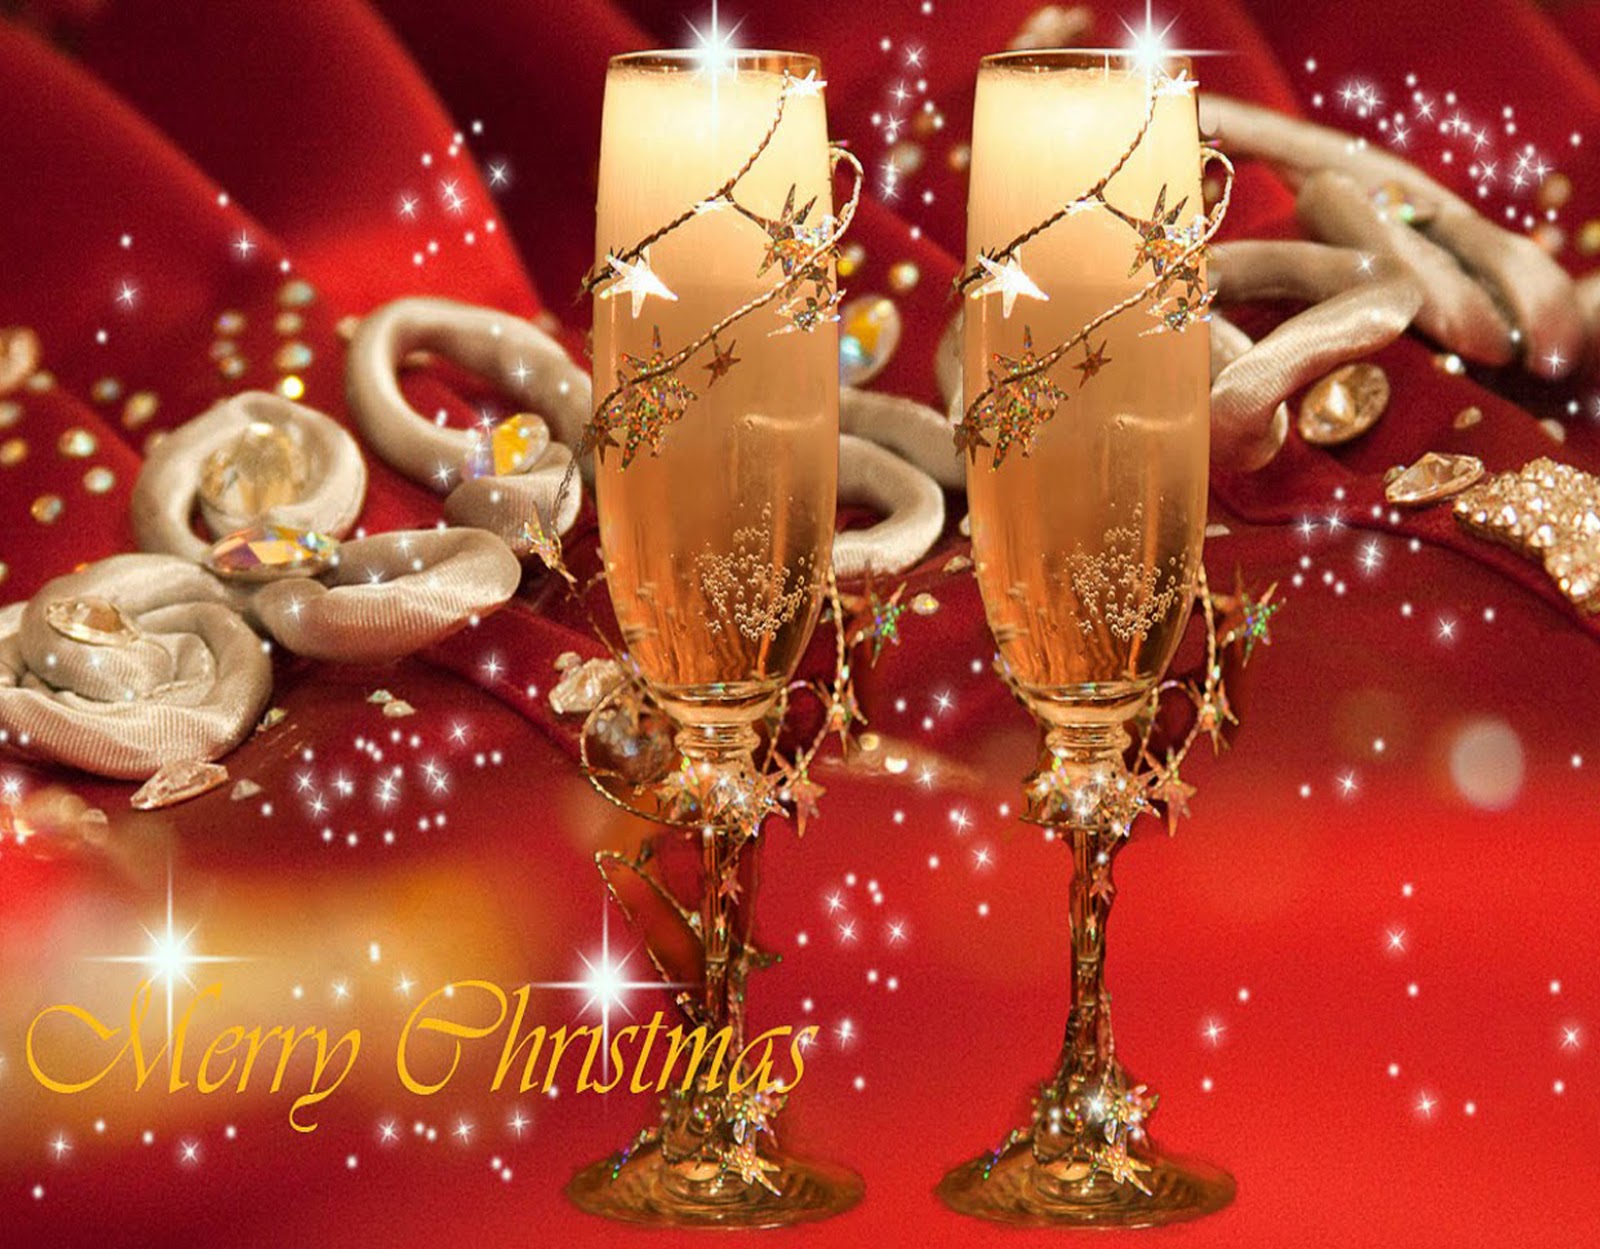 Merry Christmas Stars And Drinks Hd Wallpaper - Merry Christmas Images With Drinks - HD Wallpaper 